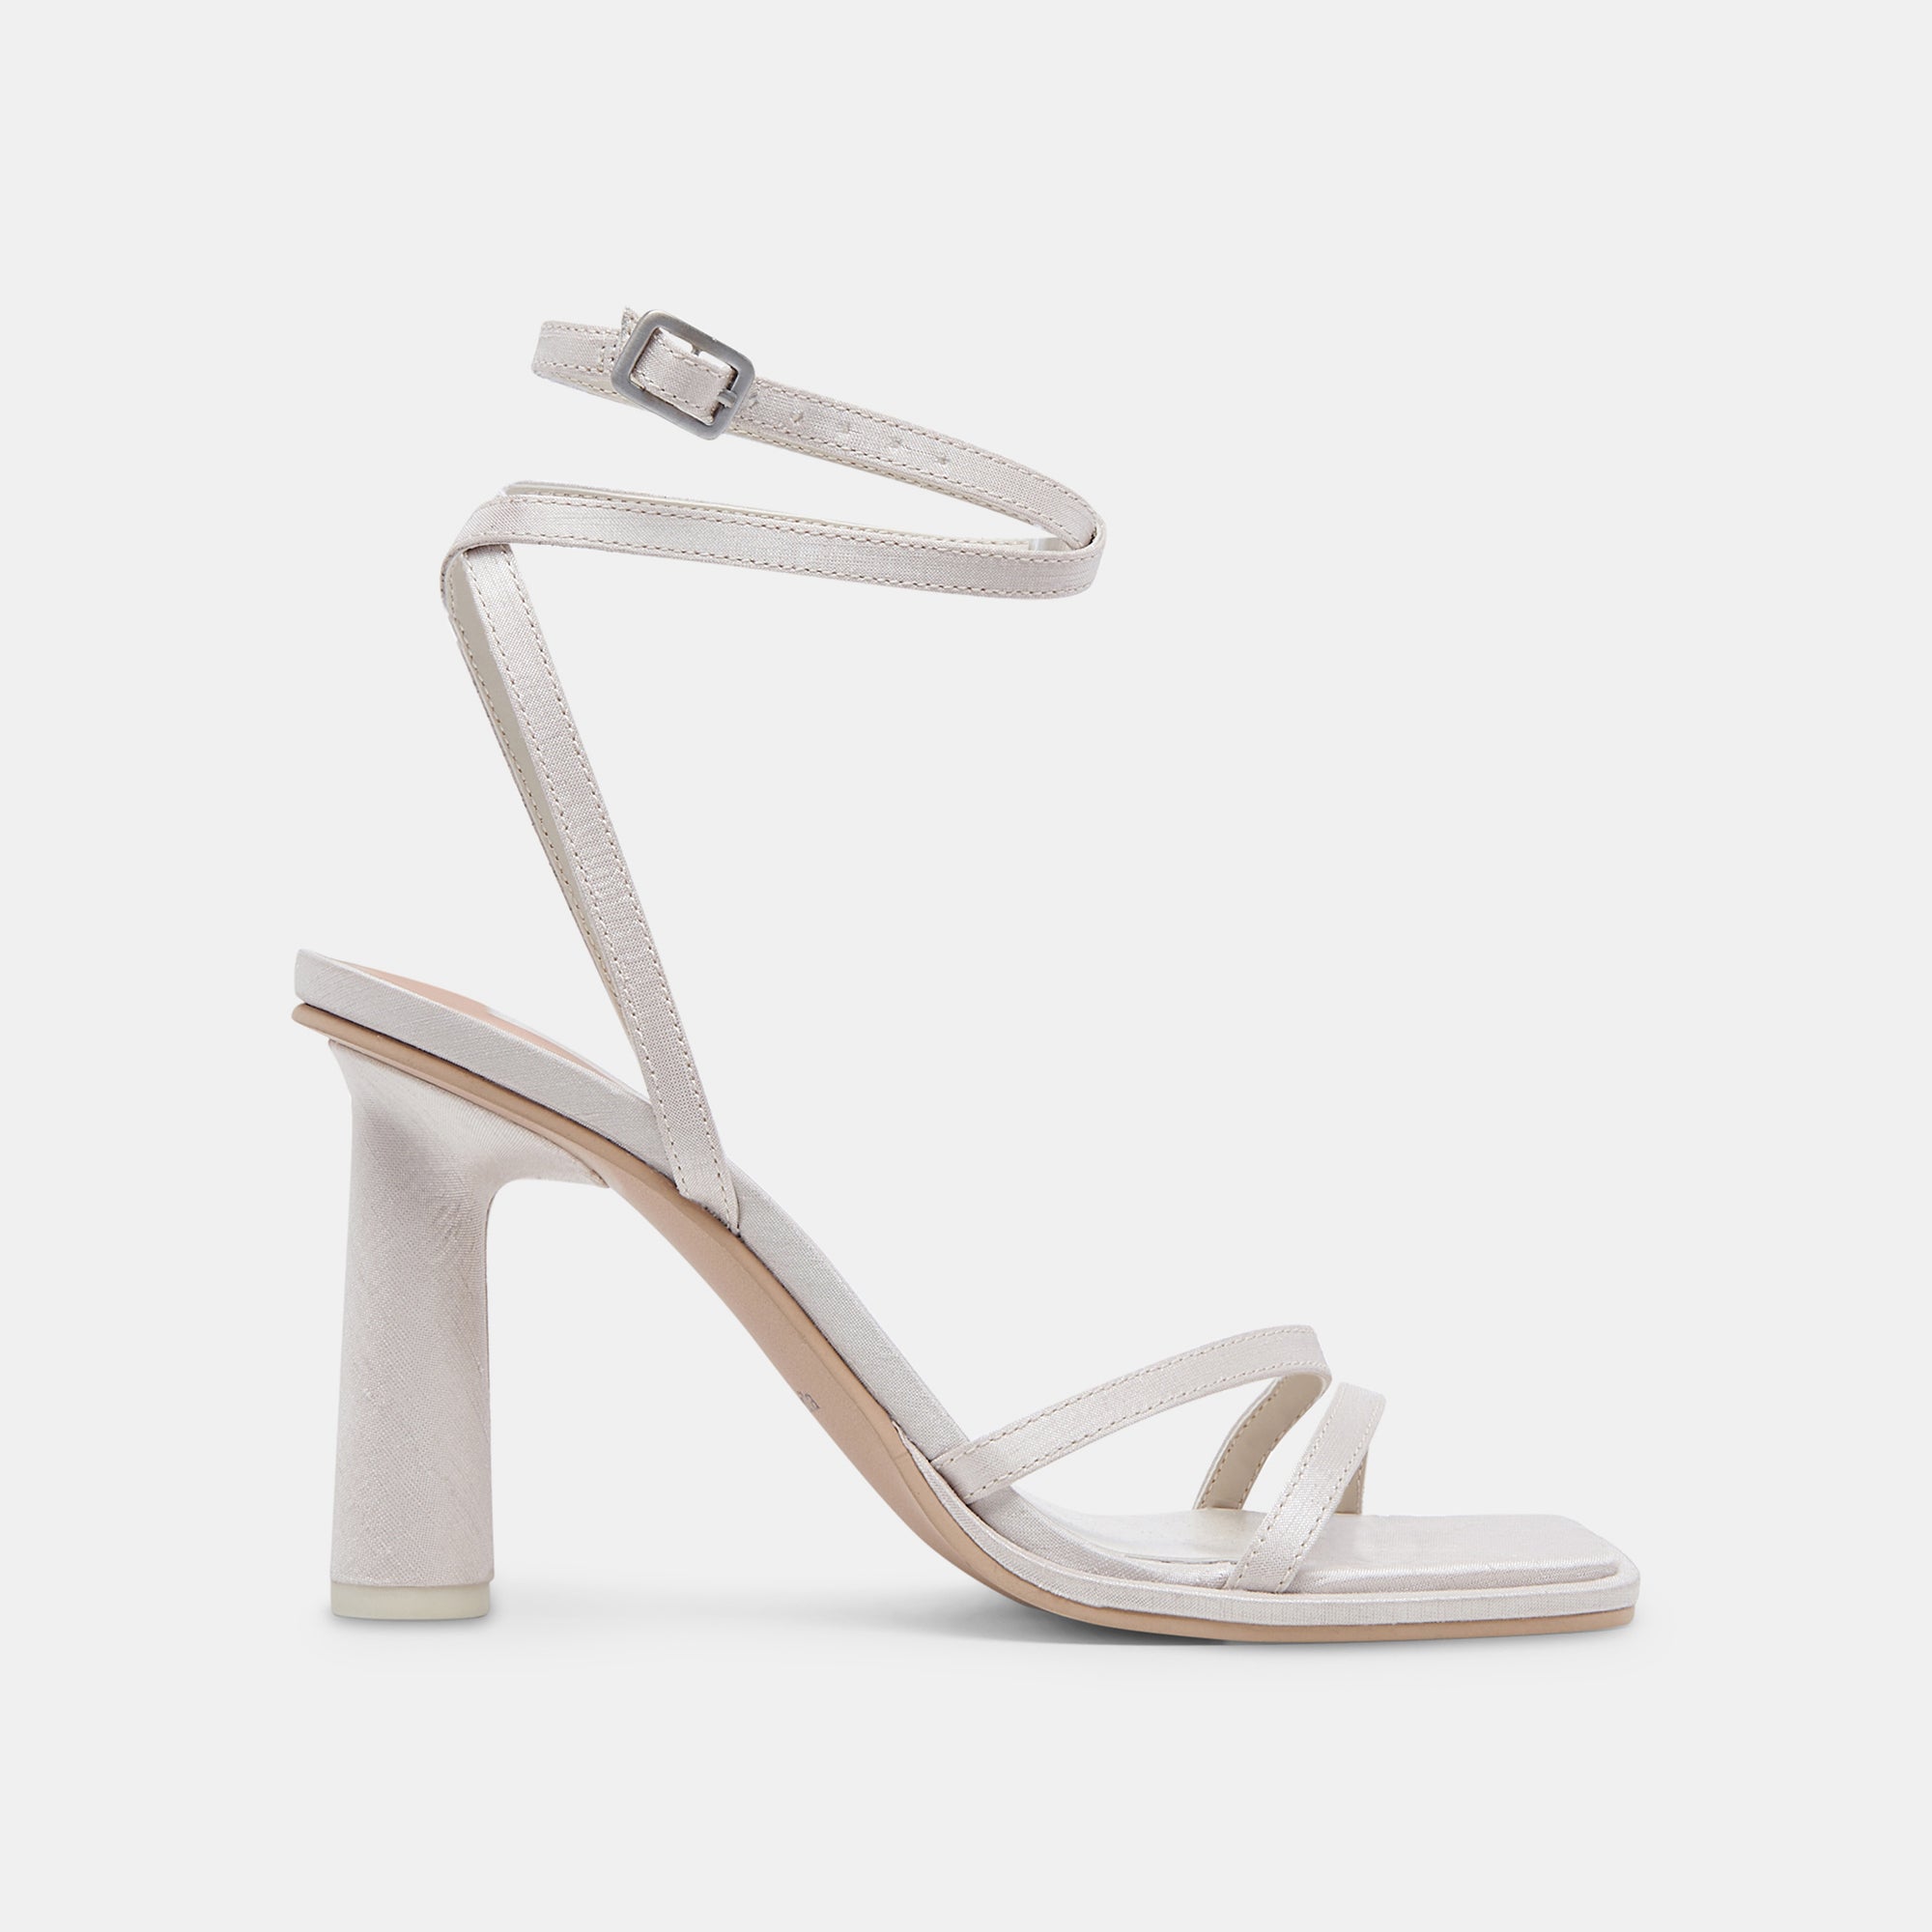 Feathered Embellished Strappy Heels (White)- FINAL SALE – Lilly's Kloset